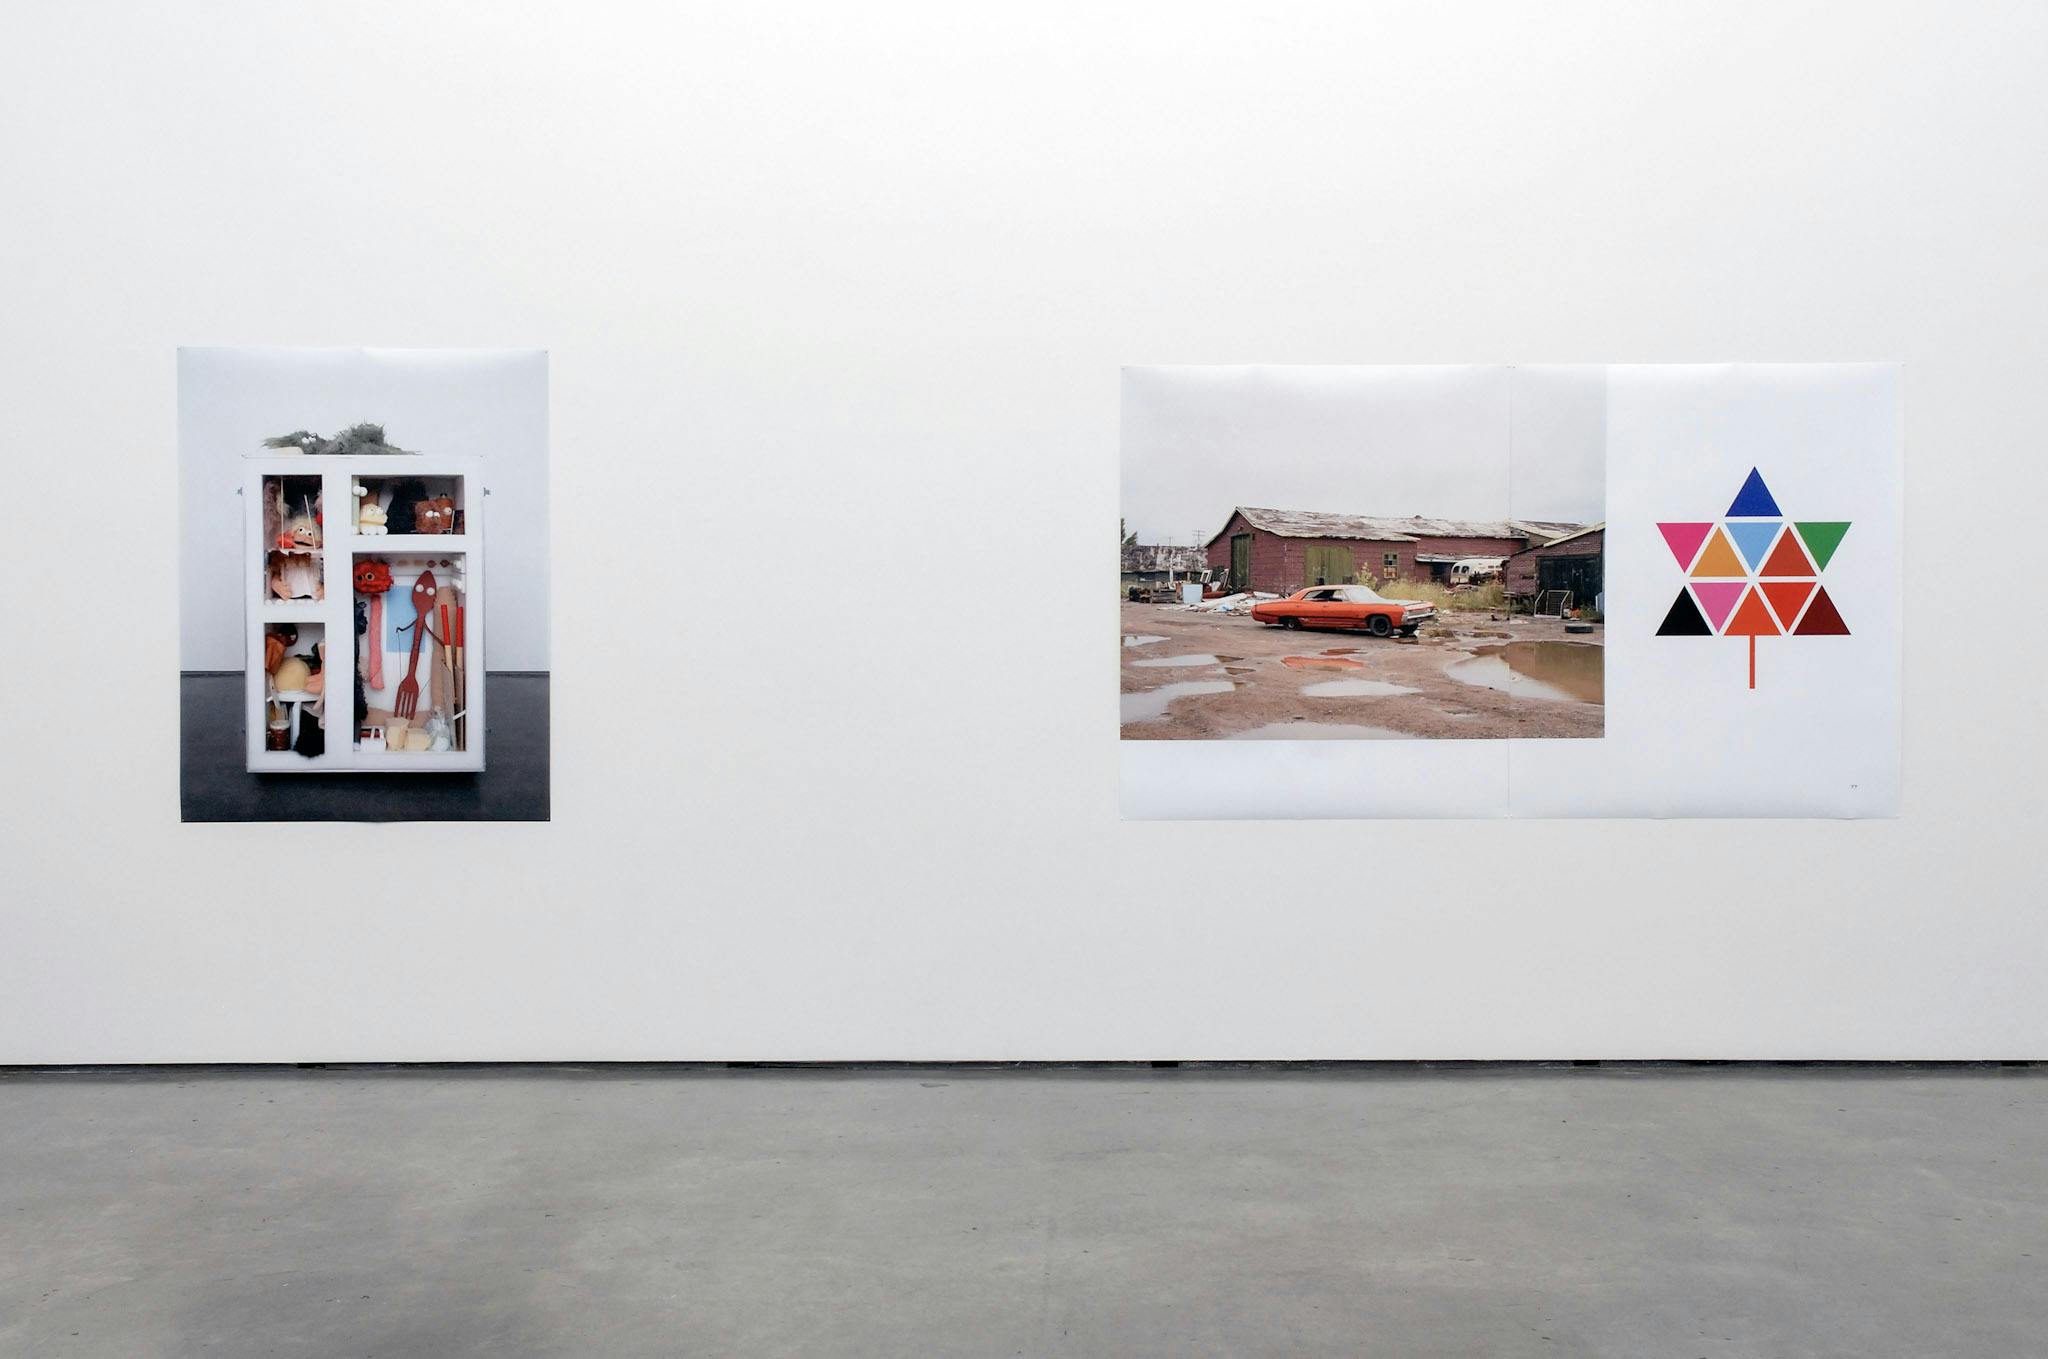 Two large-sized posters are installed on a gallery wall. The one on the left side is a photograph of a shelf filled with toys, and another poster shows countryside scenery with a car and a house. 